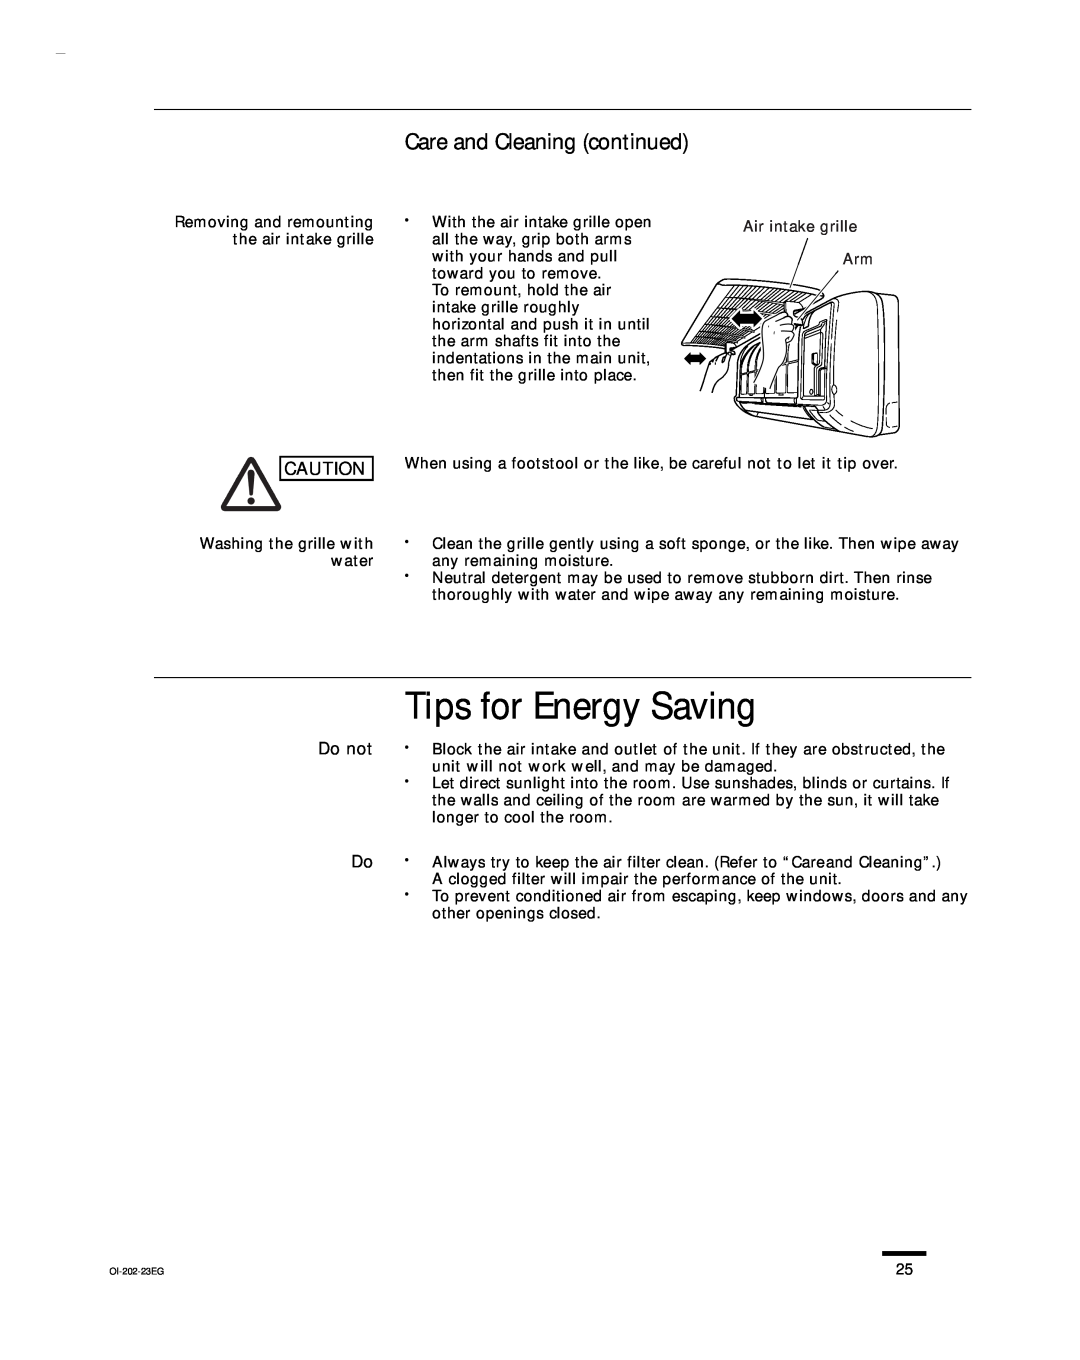 Sanyo CH1852, CH0952, KHS1852-S service manual Tips for Energy Saving, Care and Cleaning continued, Do not 